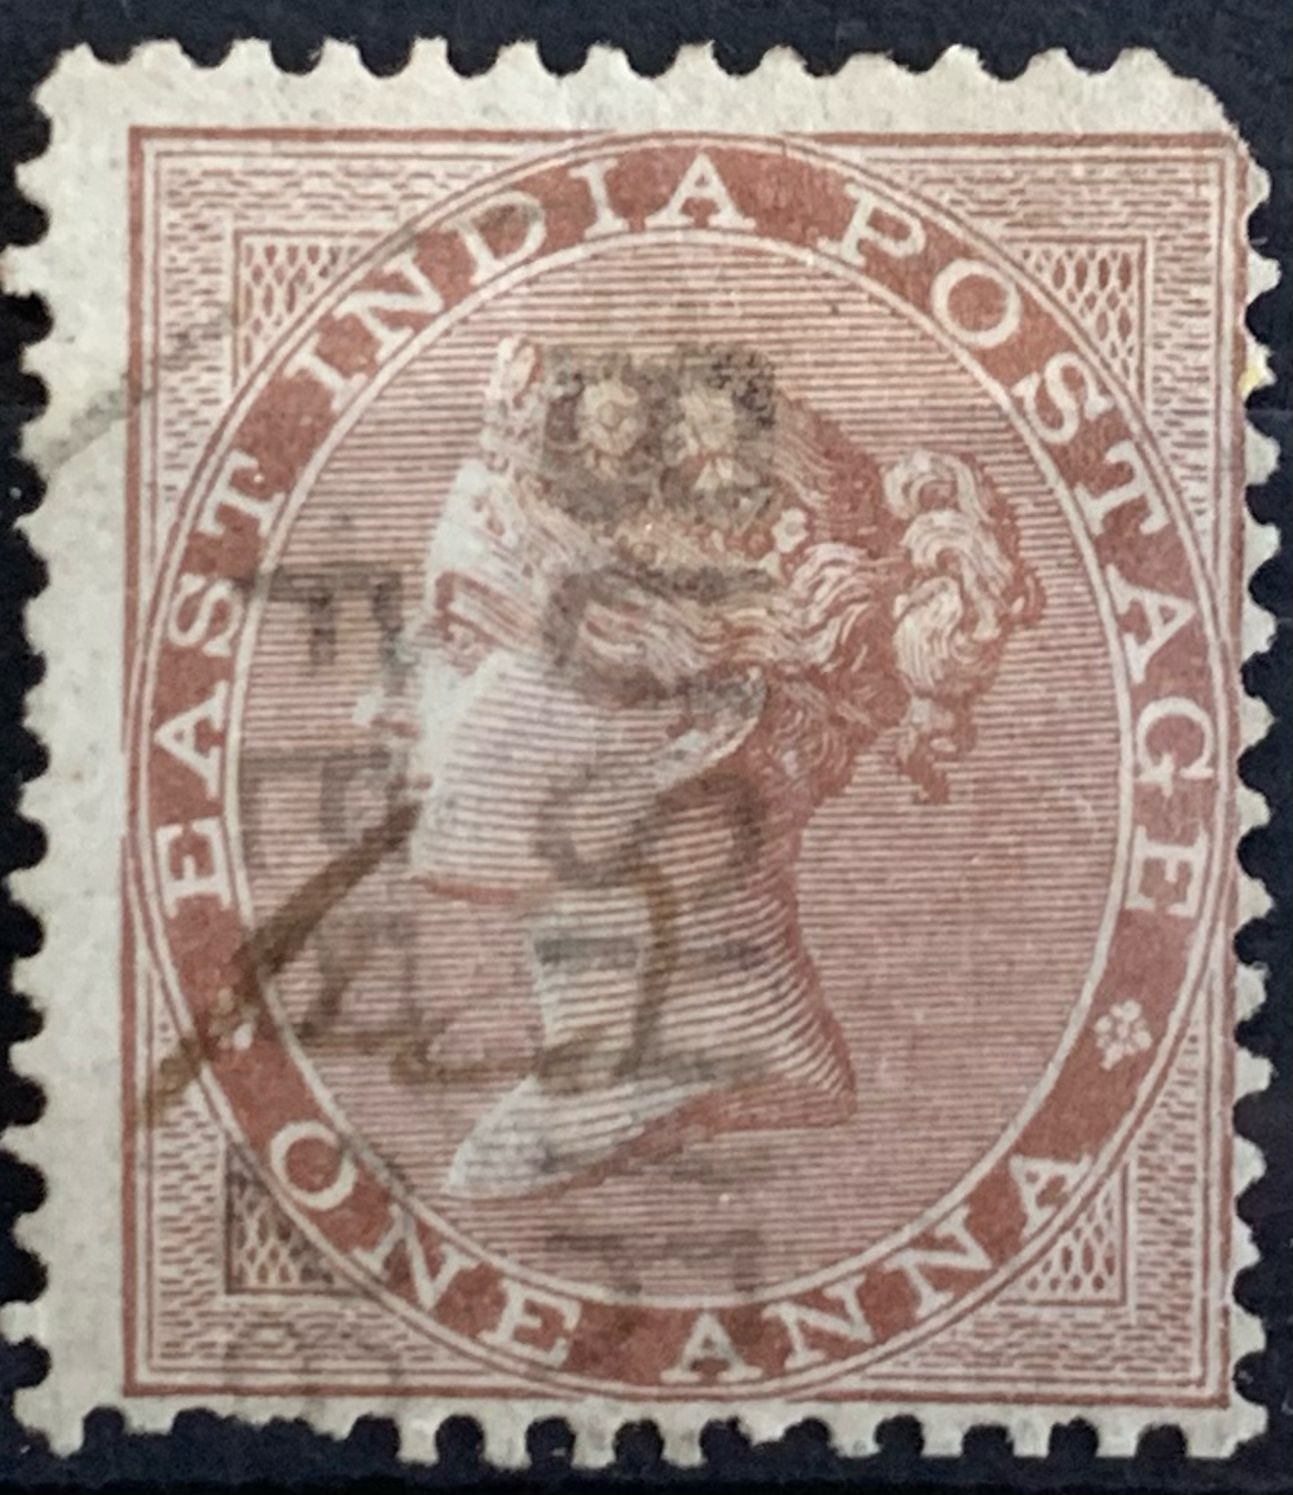 India 1865 QV 1a Used Abroad in BUSHIRE Fine Cancelled